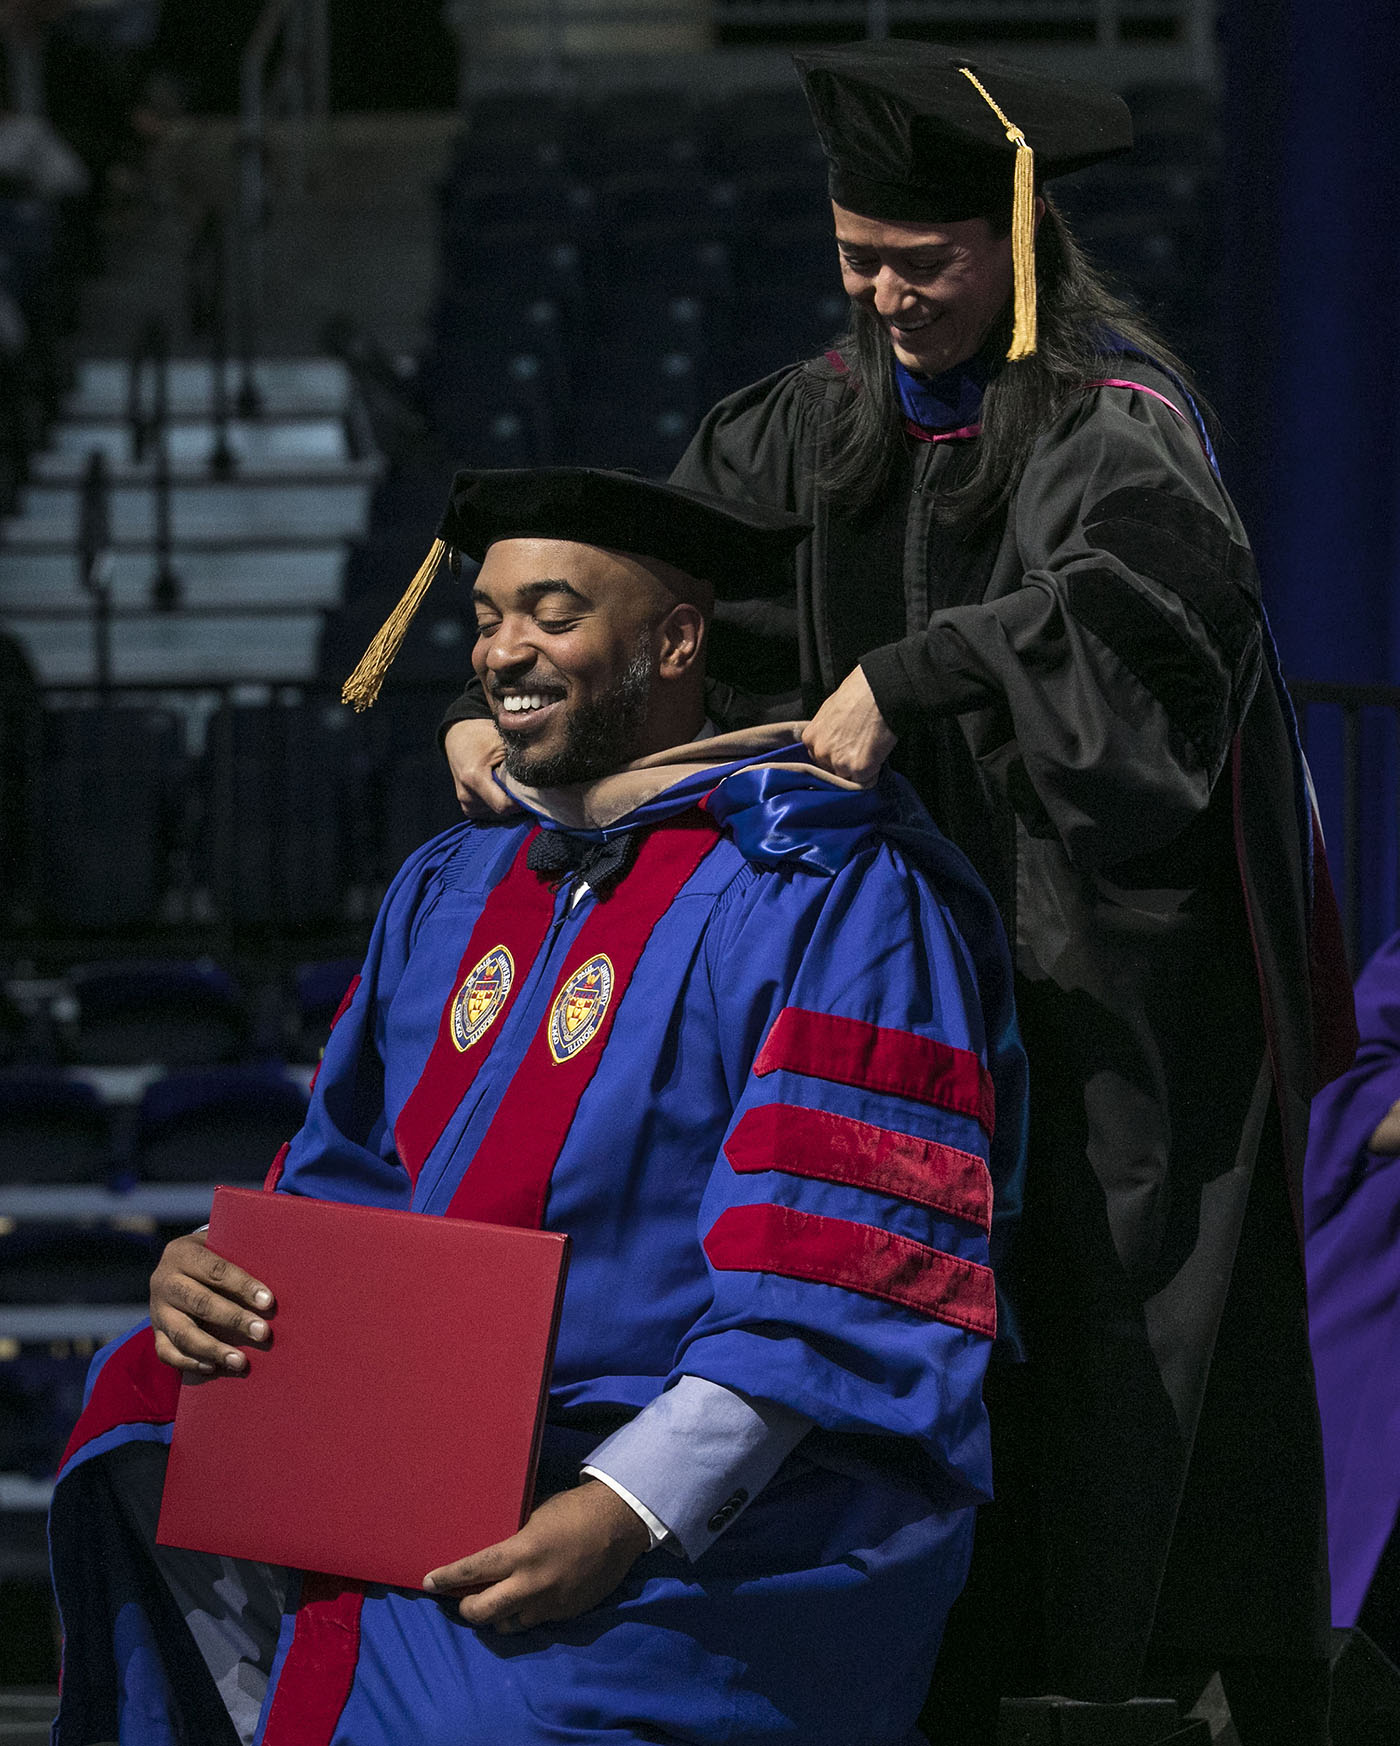 Driehaus College of Business doctoral graduate Brandon Hendrix receives his hood during the DePaul University commencement ceremony.